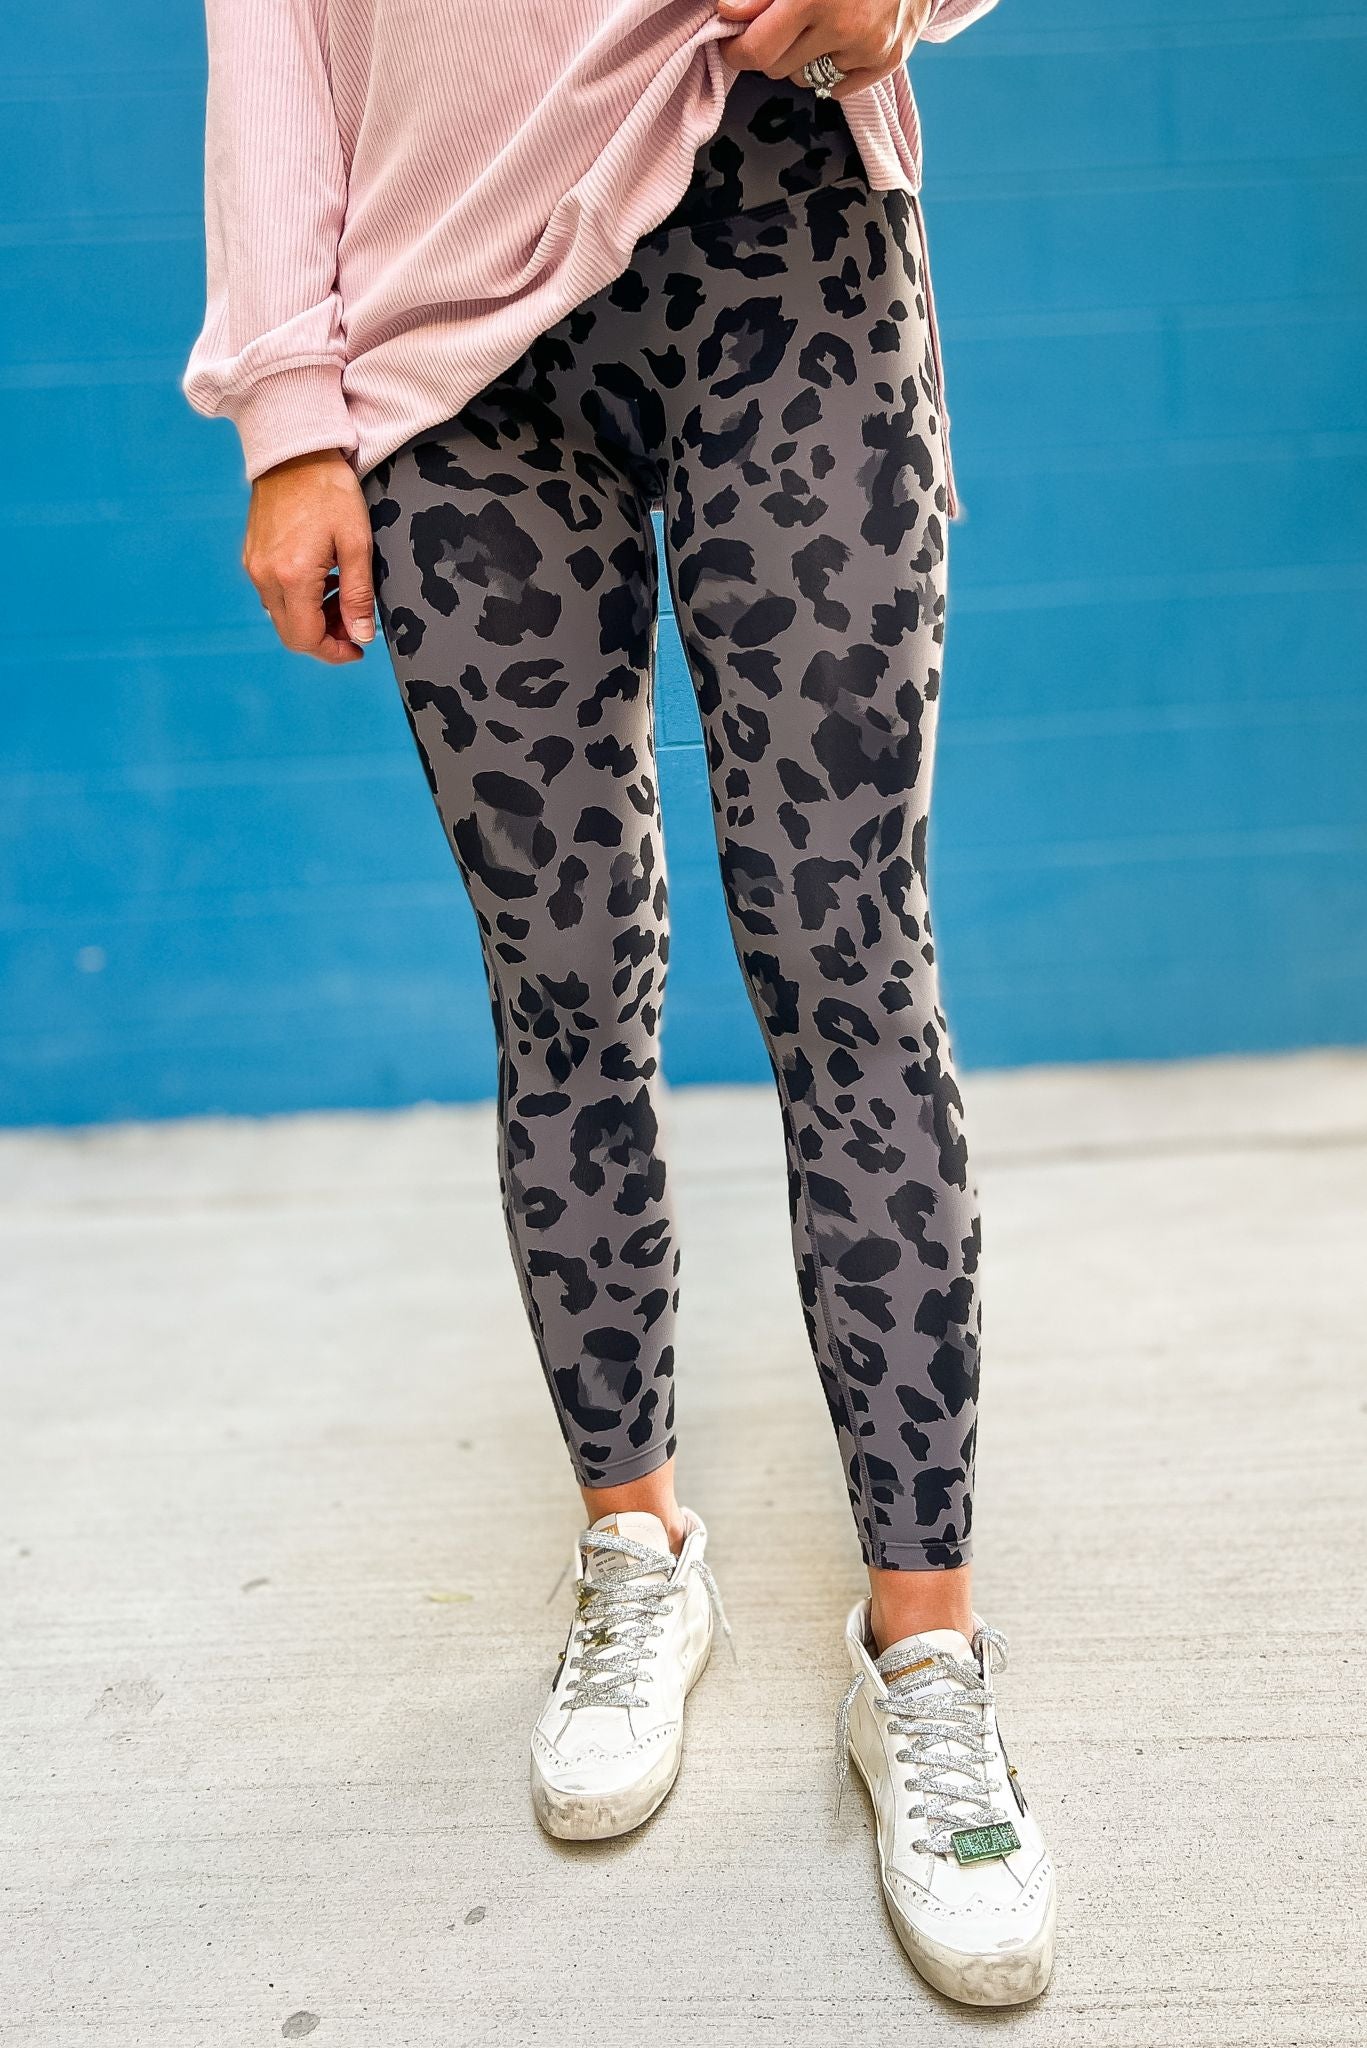 Load image into Gallery viewer, Black Animal Print Active Leggings SSYS The Label, leggings, fall fashion, must have, mom wear, every day wear, athleisure, shop style your senses by mallory fitzsimmons
